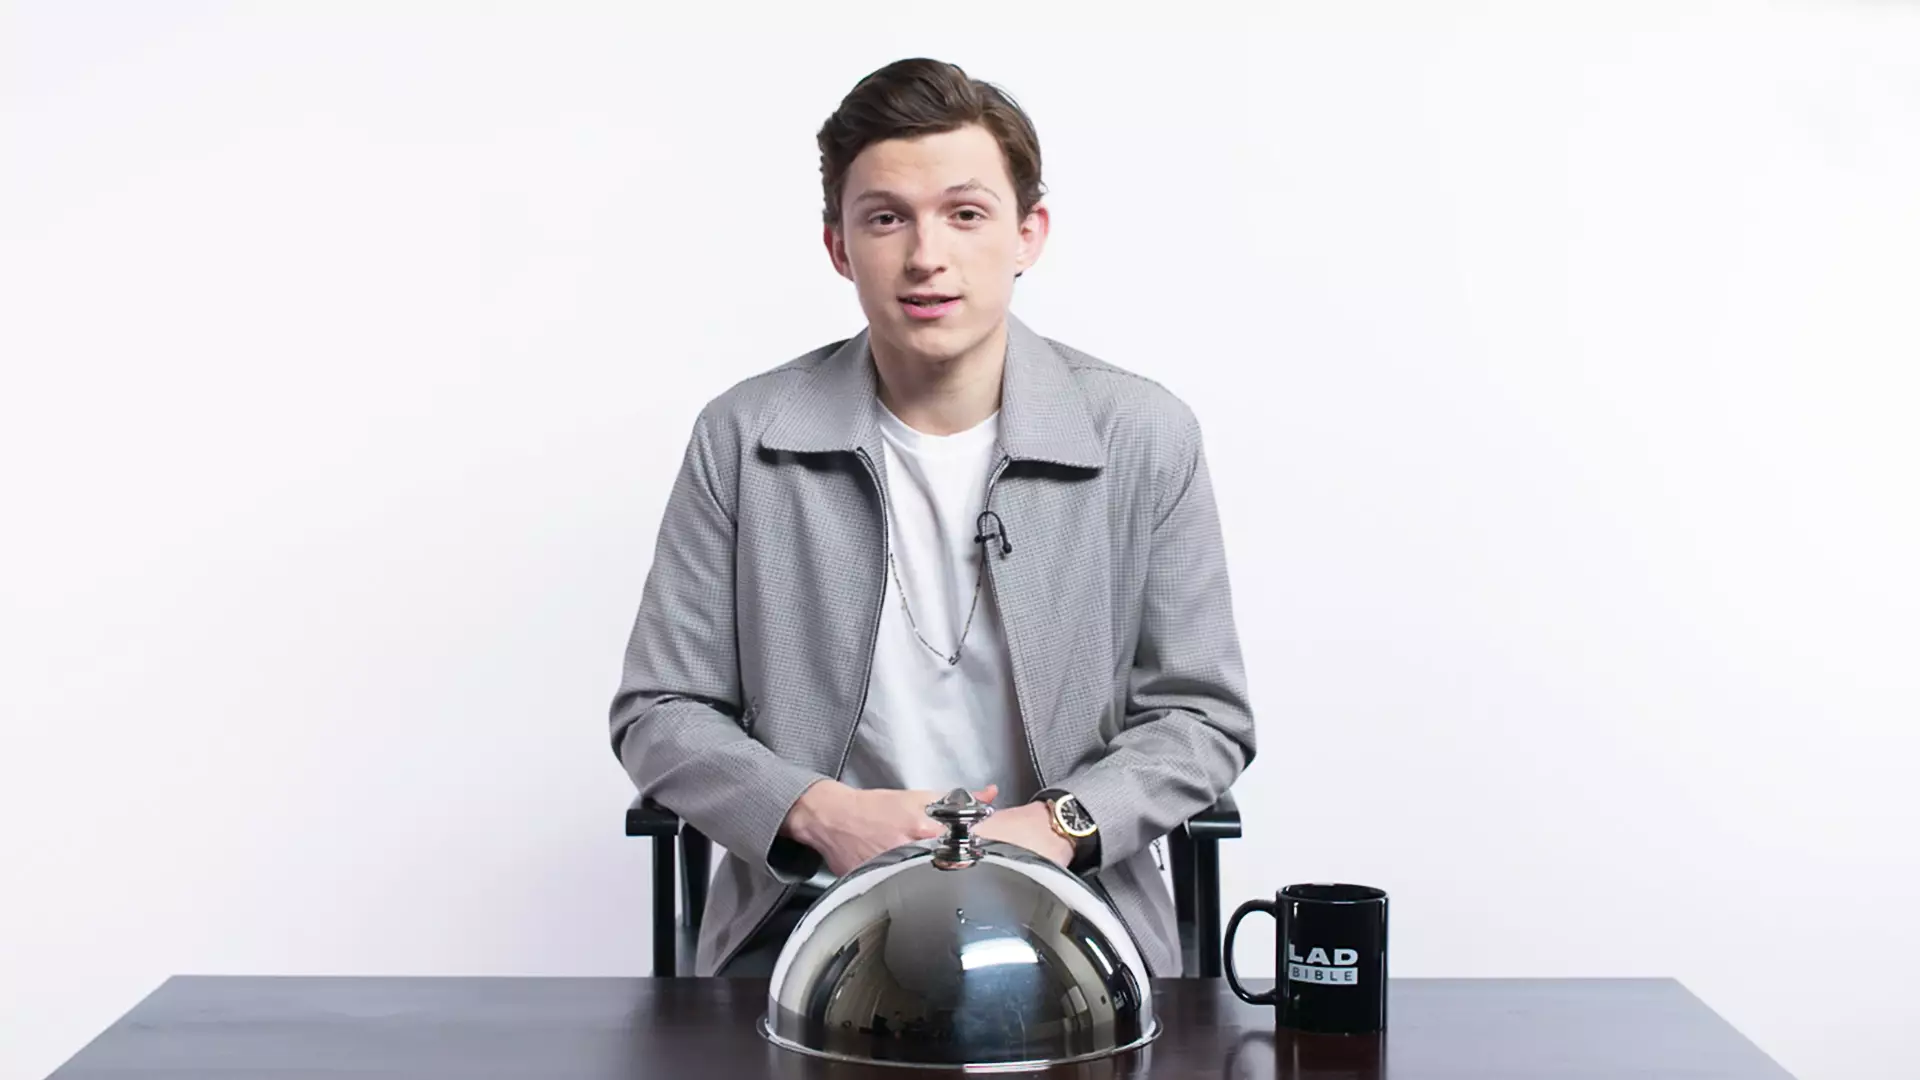 ​Spider-Man Star Tom Holland Goes In To Battle In Snack Wars